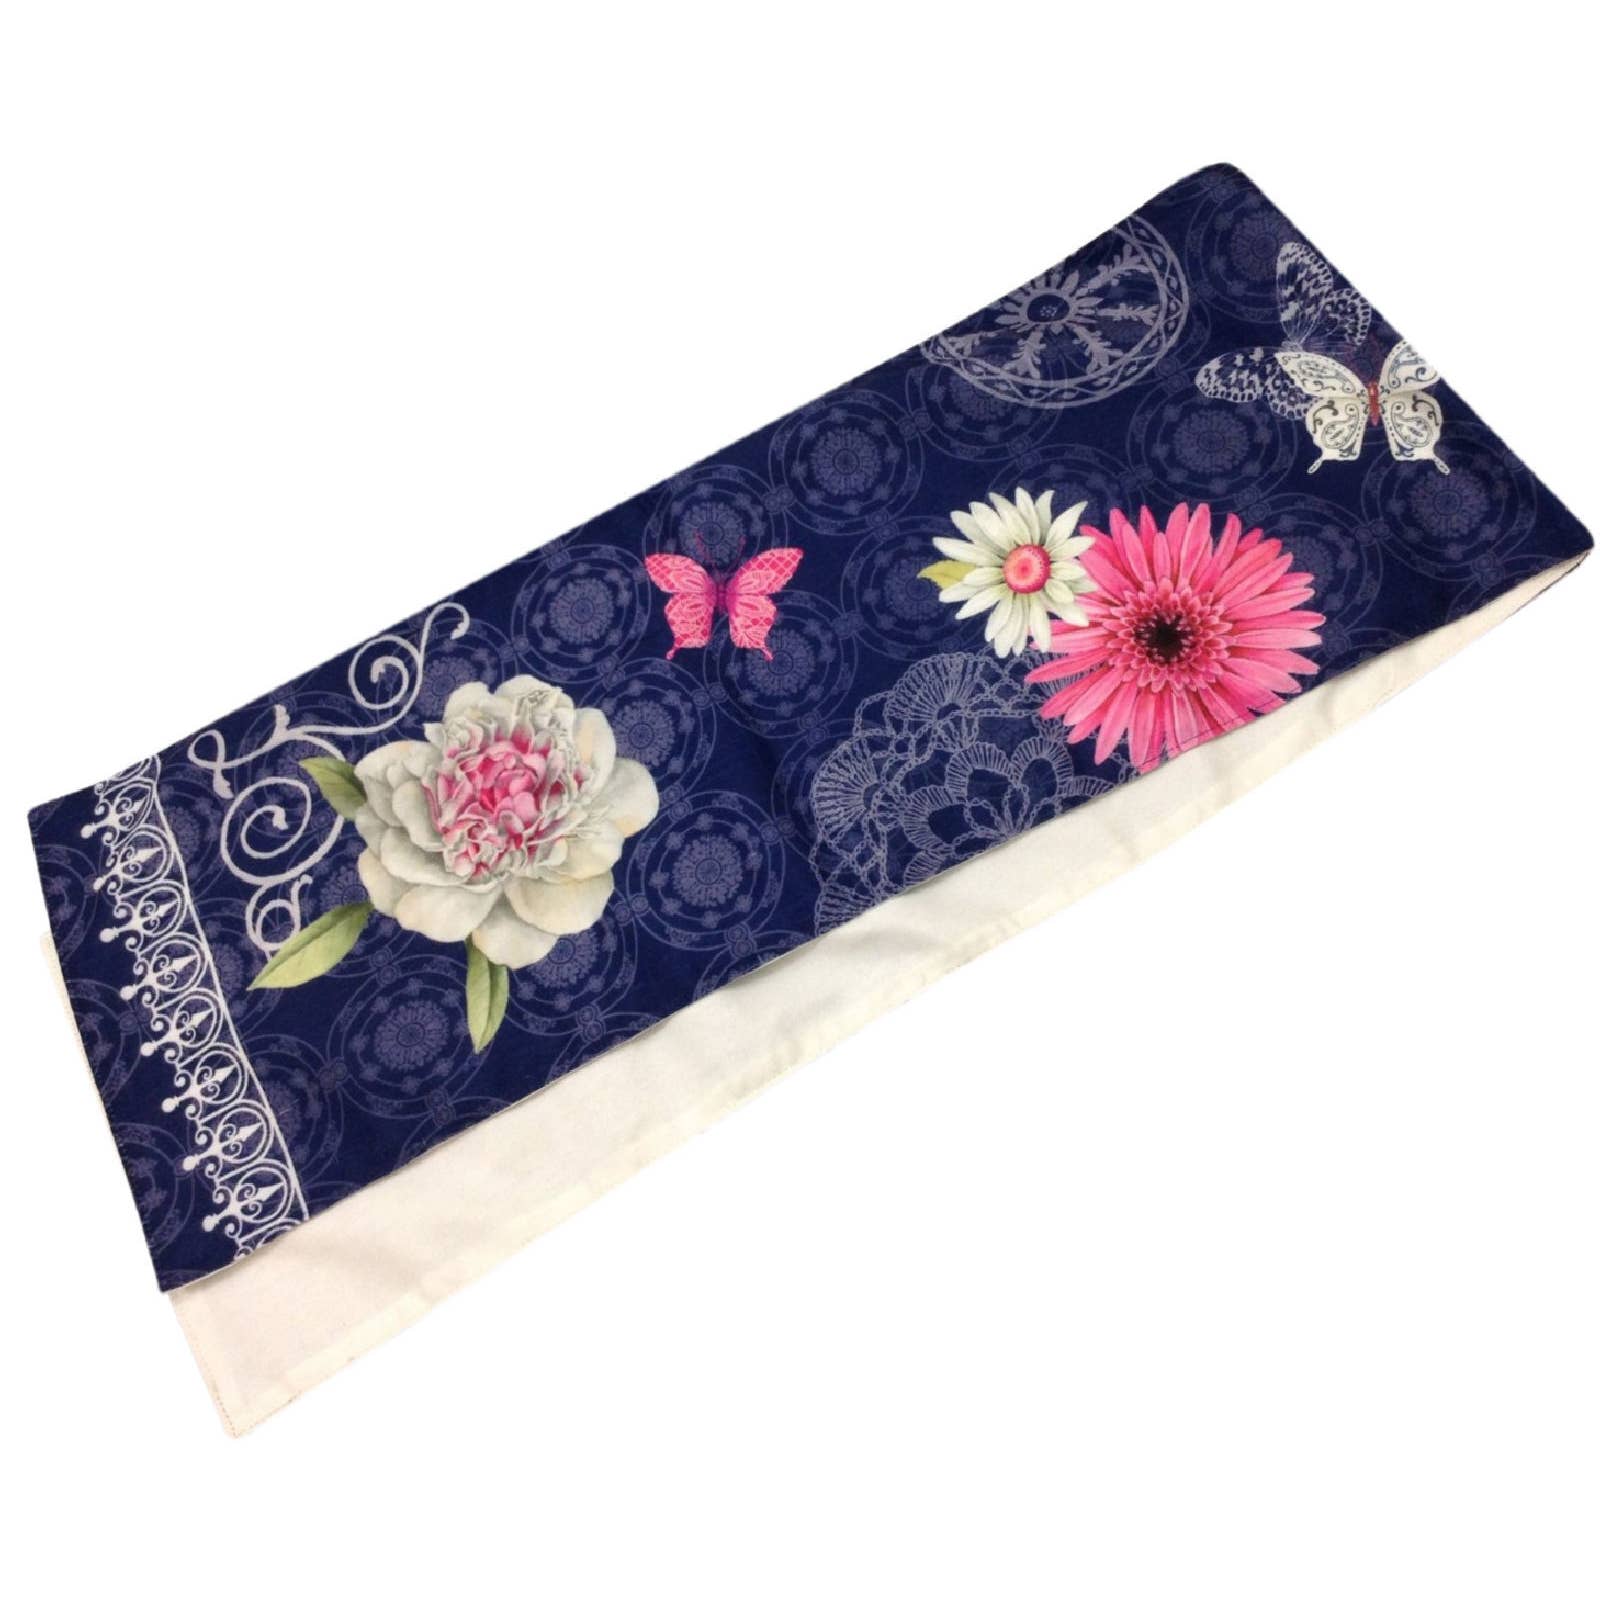 Indigo Spring Peonies Table Runner Boho Floral Butterfly Sandy Clough 72" NEW